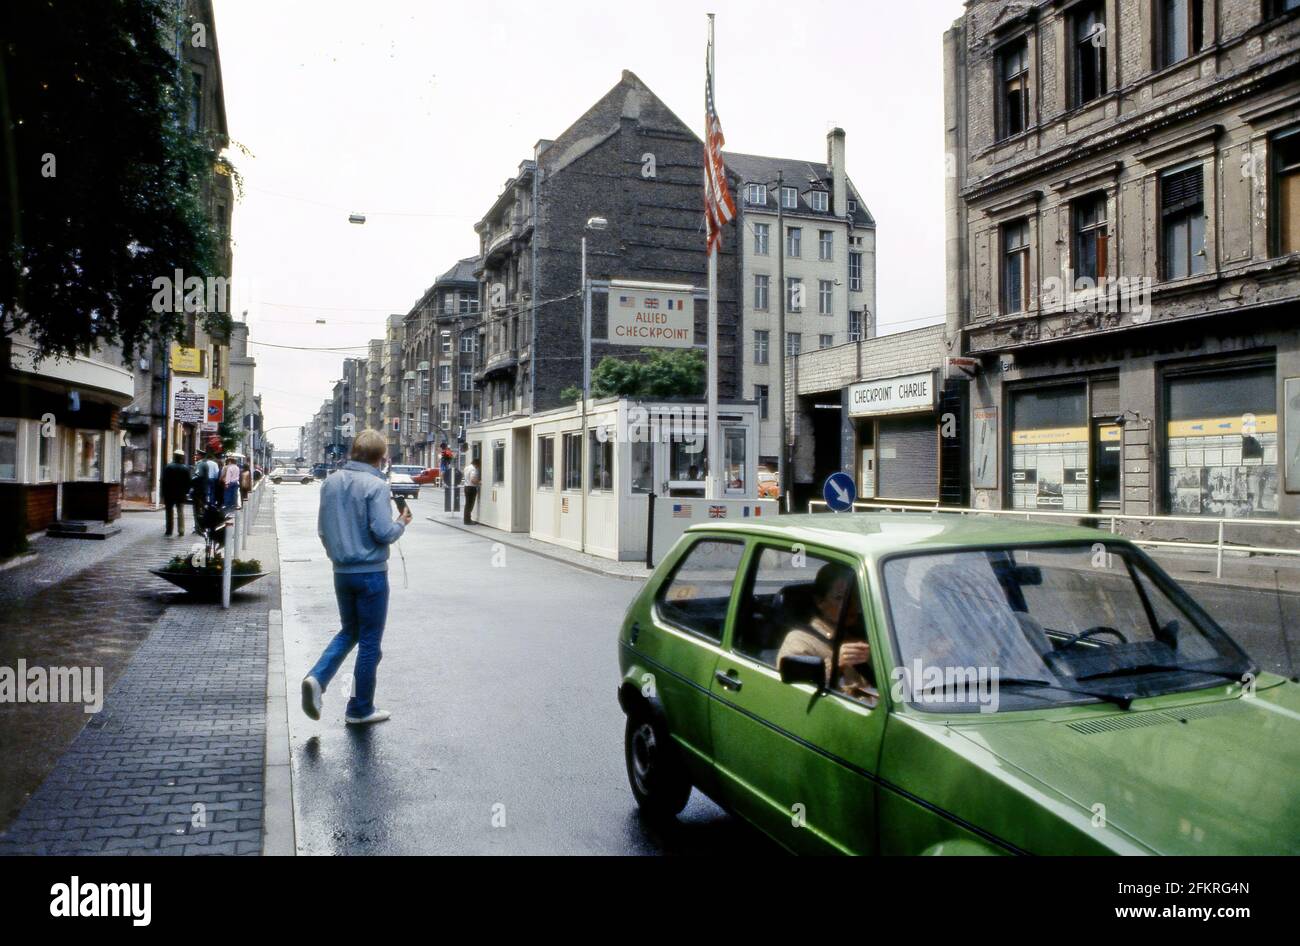 Berlin Wall, Checkpoint Charlie, in July 1984, street scene with pedestrians. Stock Photo